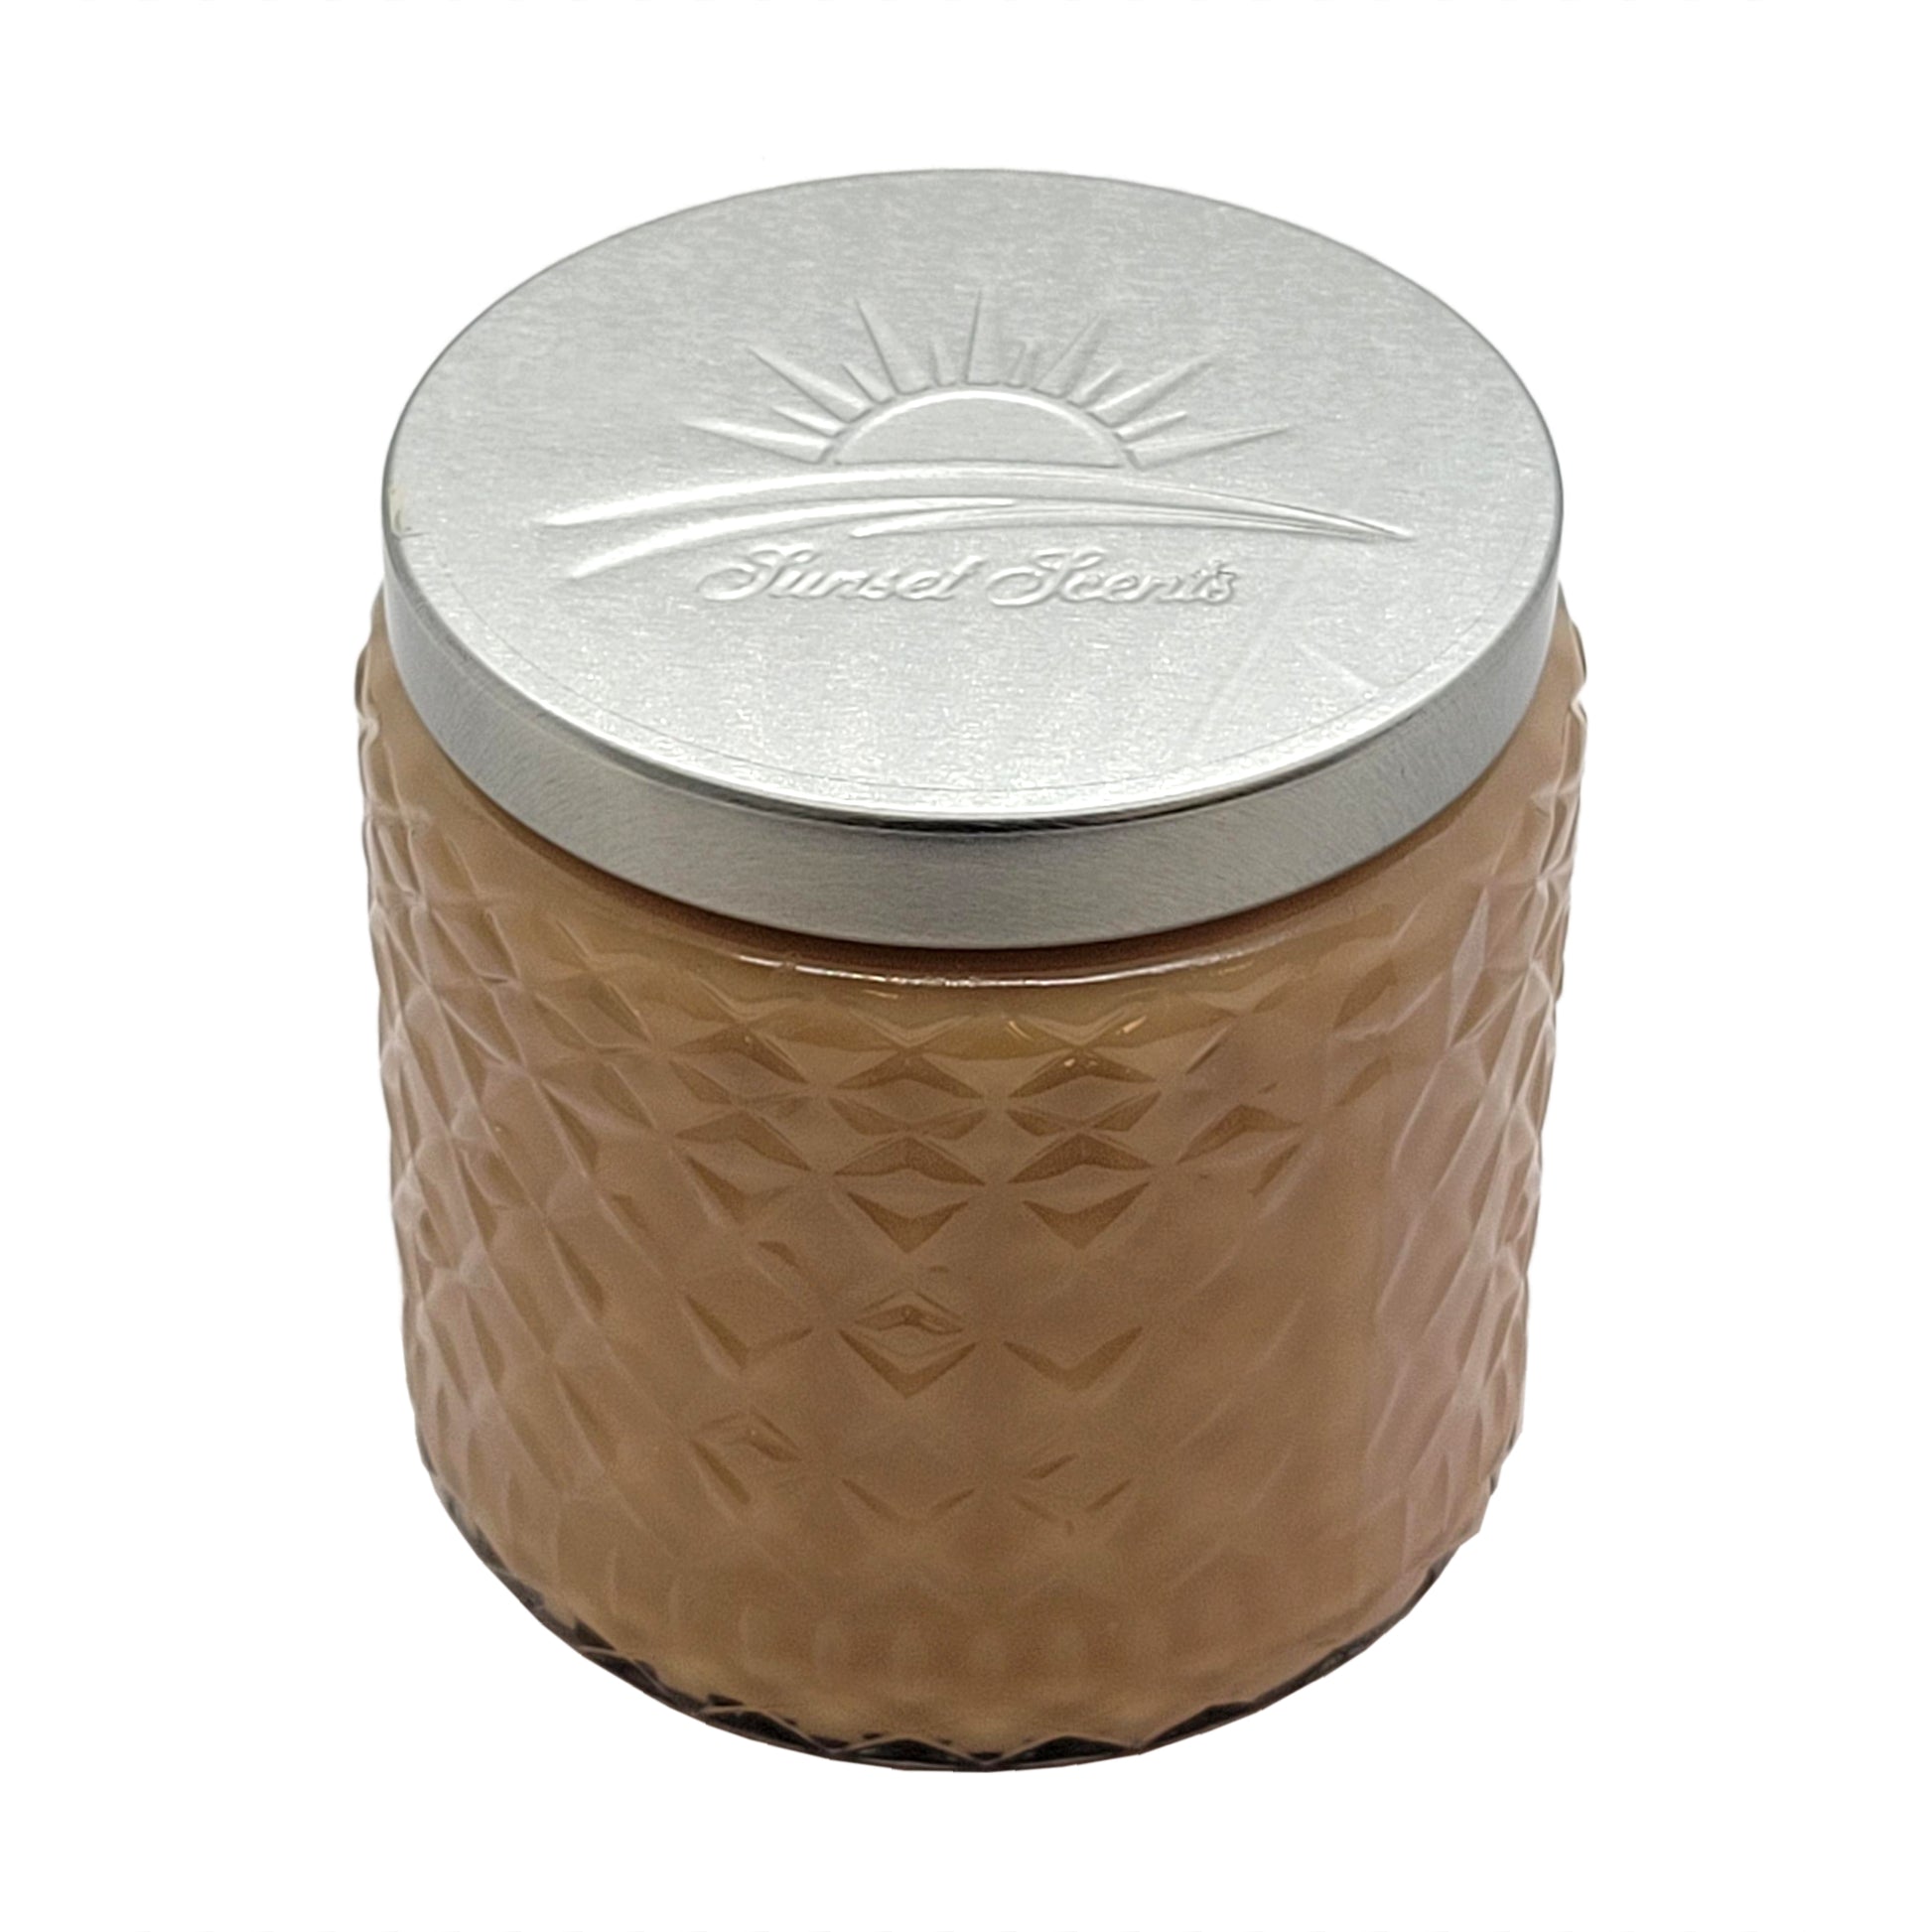 North Pole Bakery - Medium Scented Candle